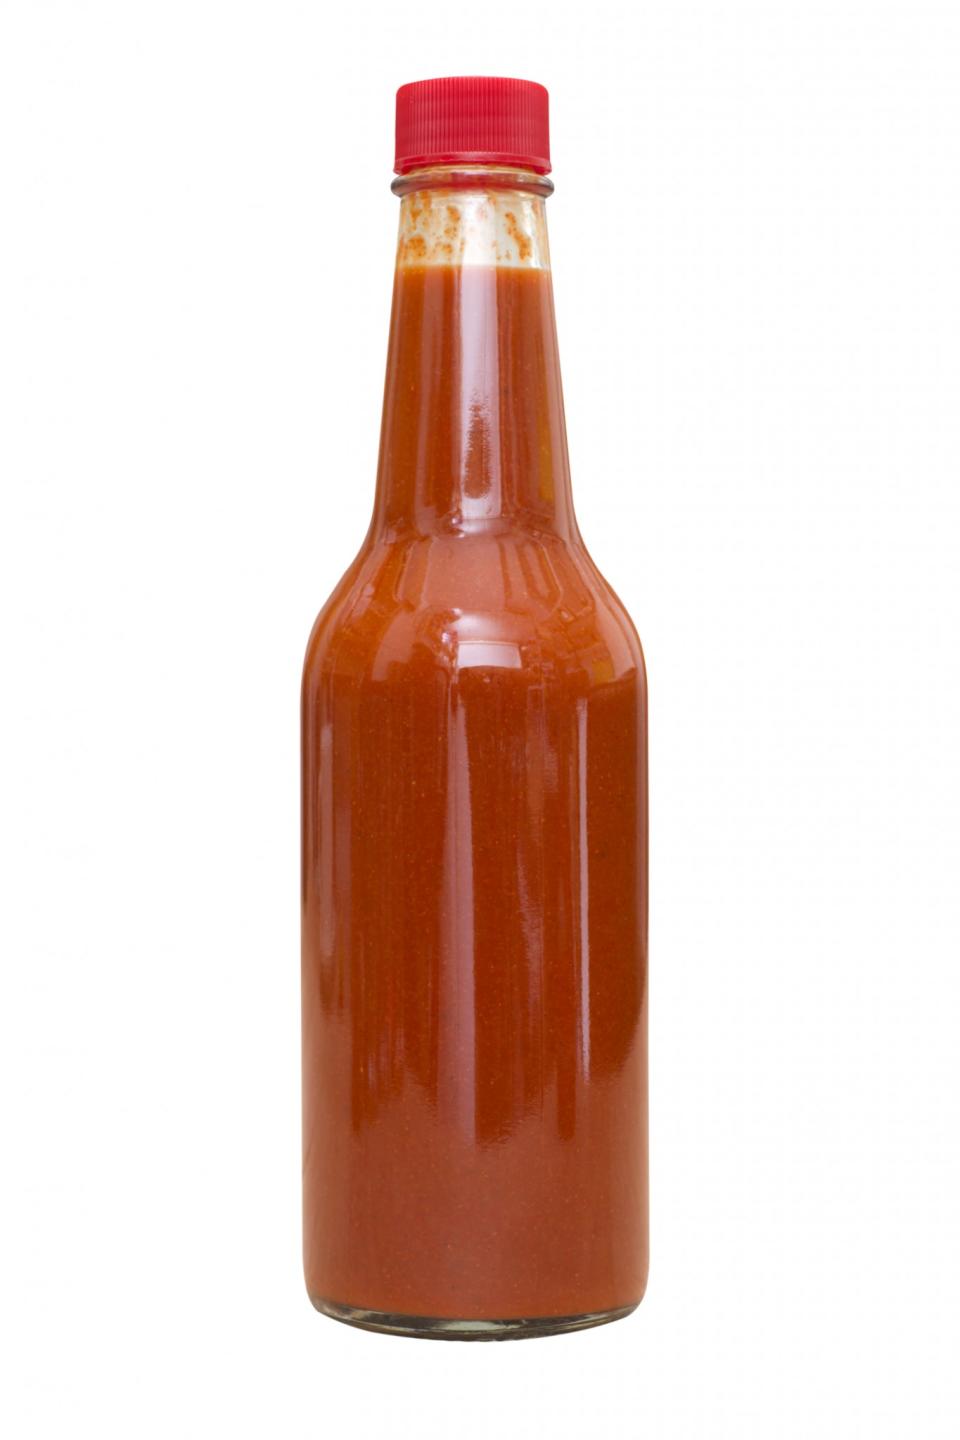 Don’t refrigerate: Hot sauce